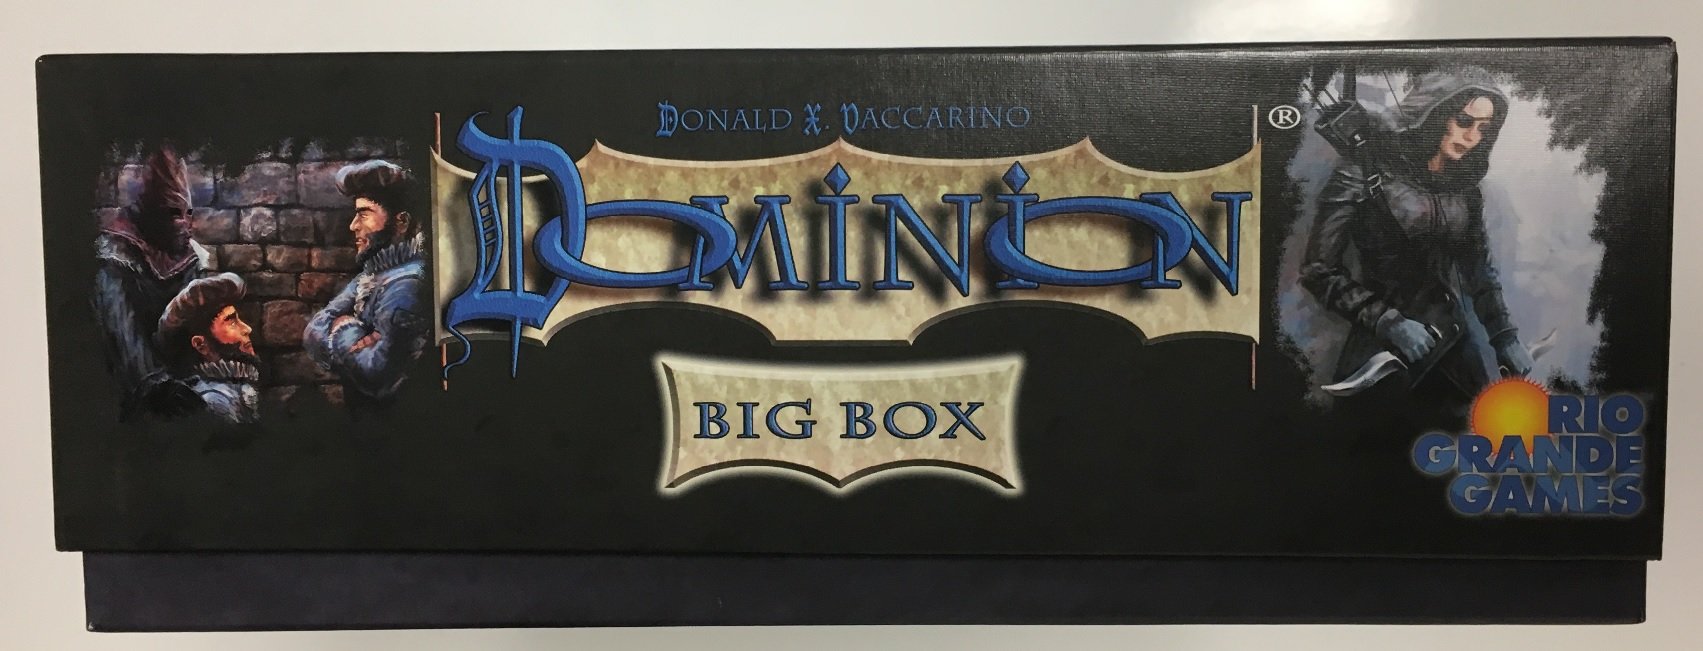 Rio Grande Games: Dominion Big Box 2nd Edition: Strategy Board Game, Comes with Extra Base Cards for 5-6 Players, Compatible with all Dominion Expansions